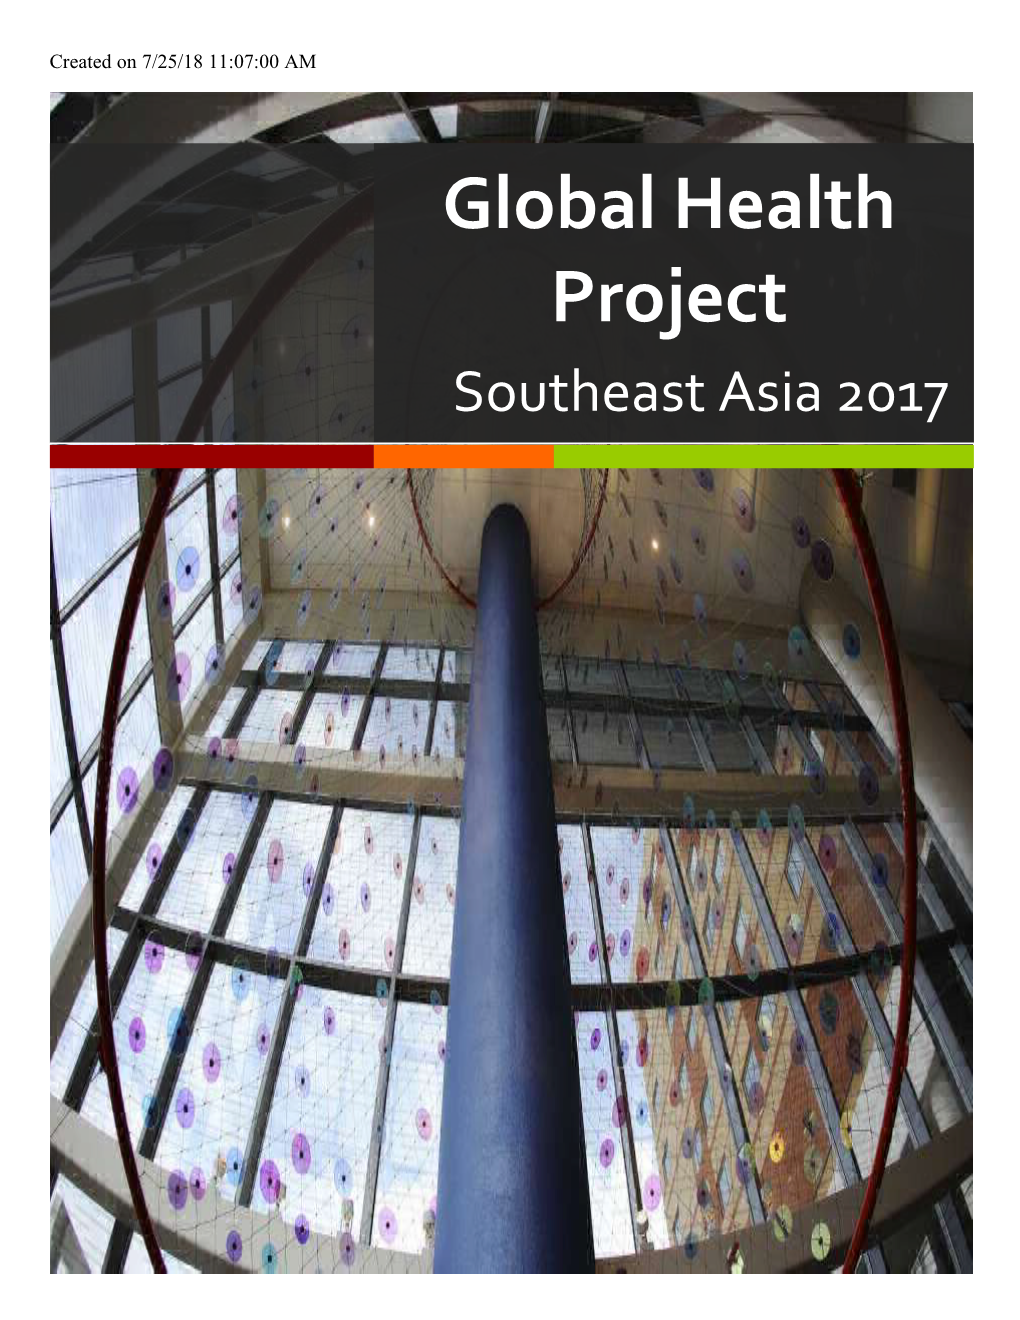 Global Health Project Southeast Asia 2017